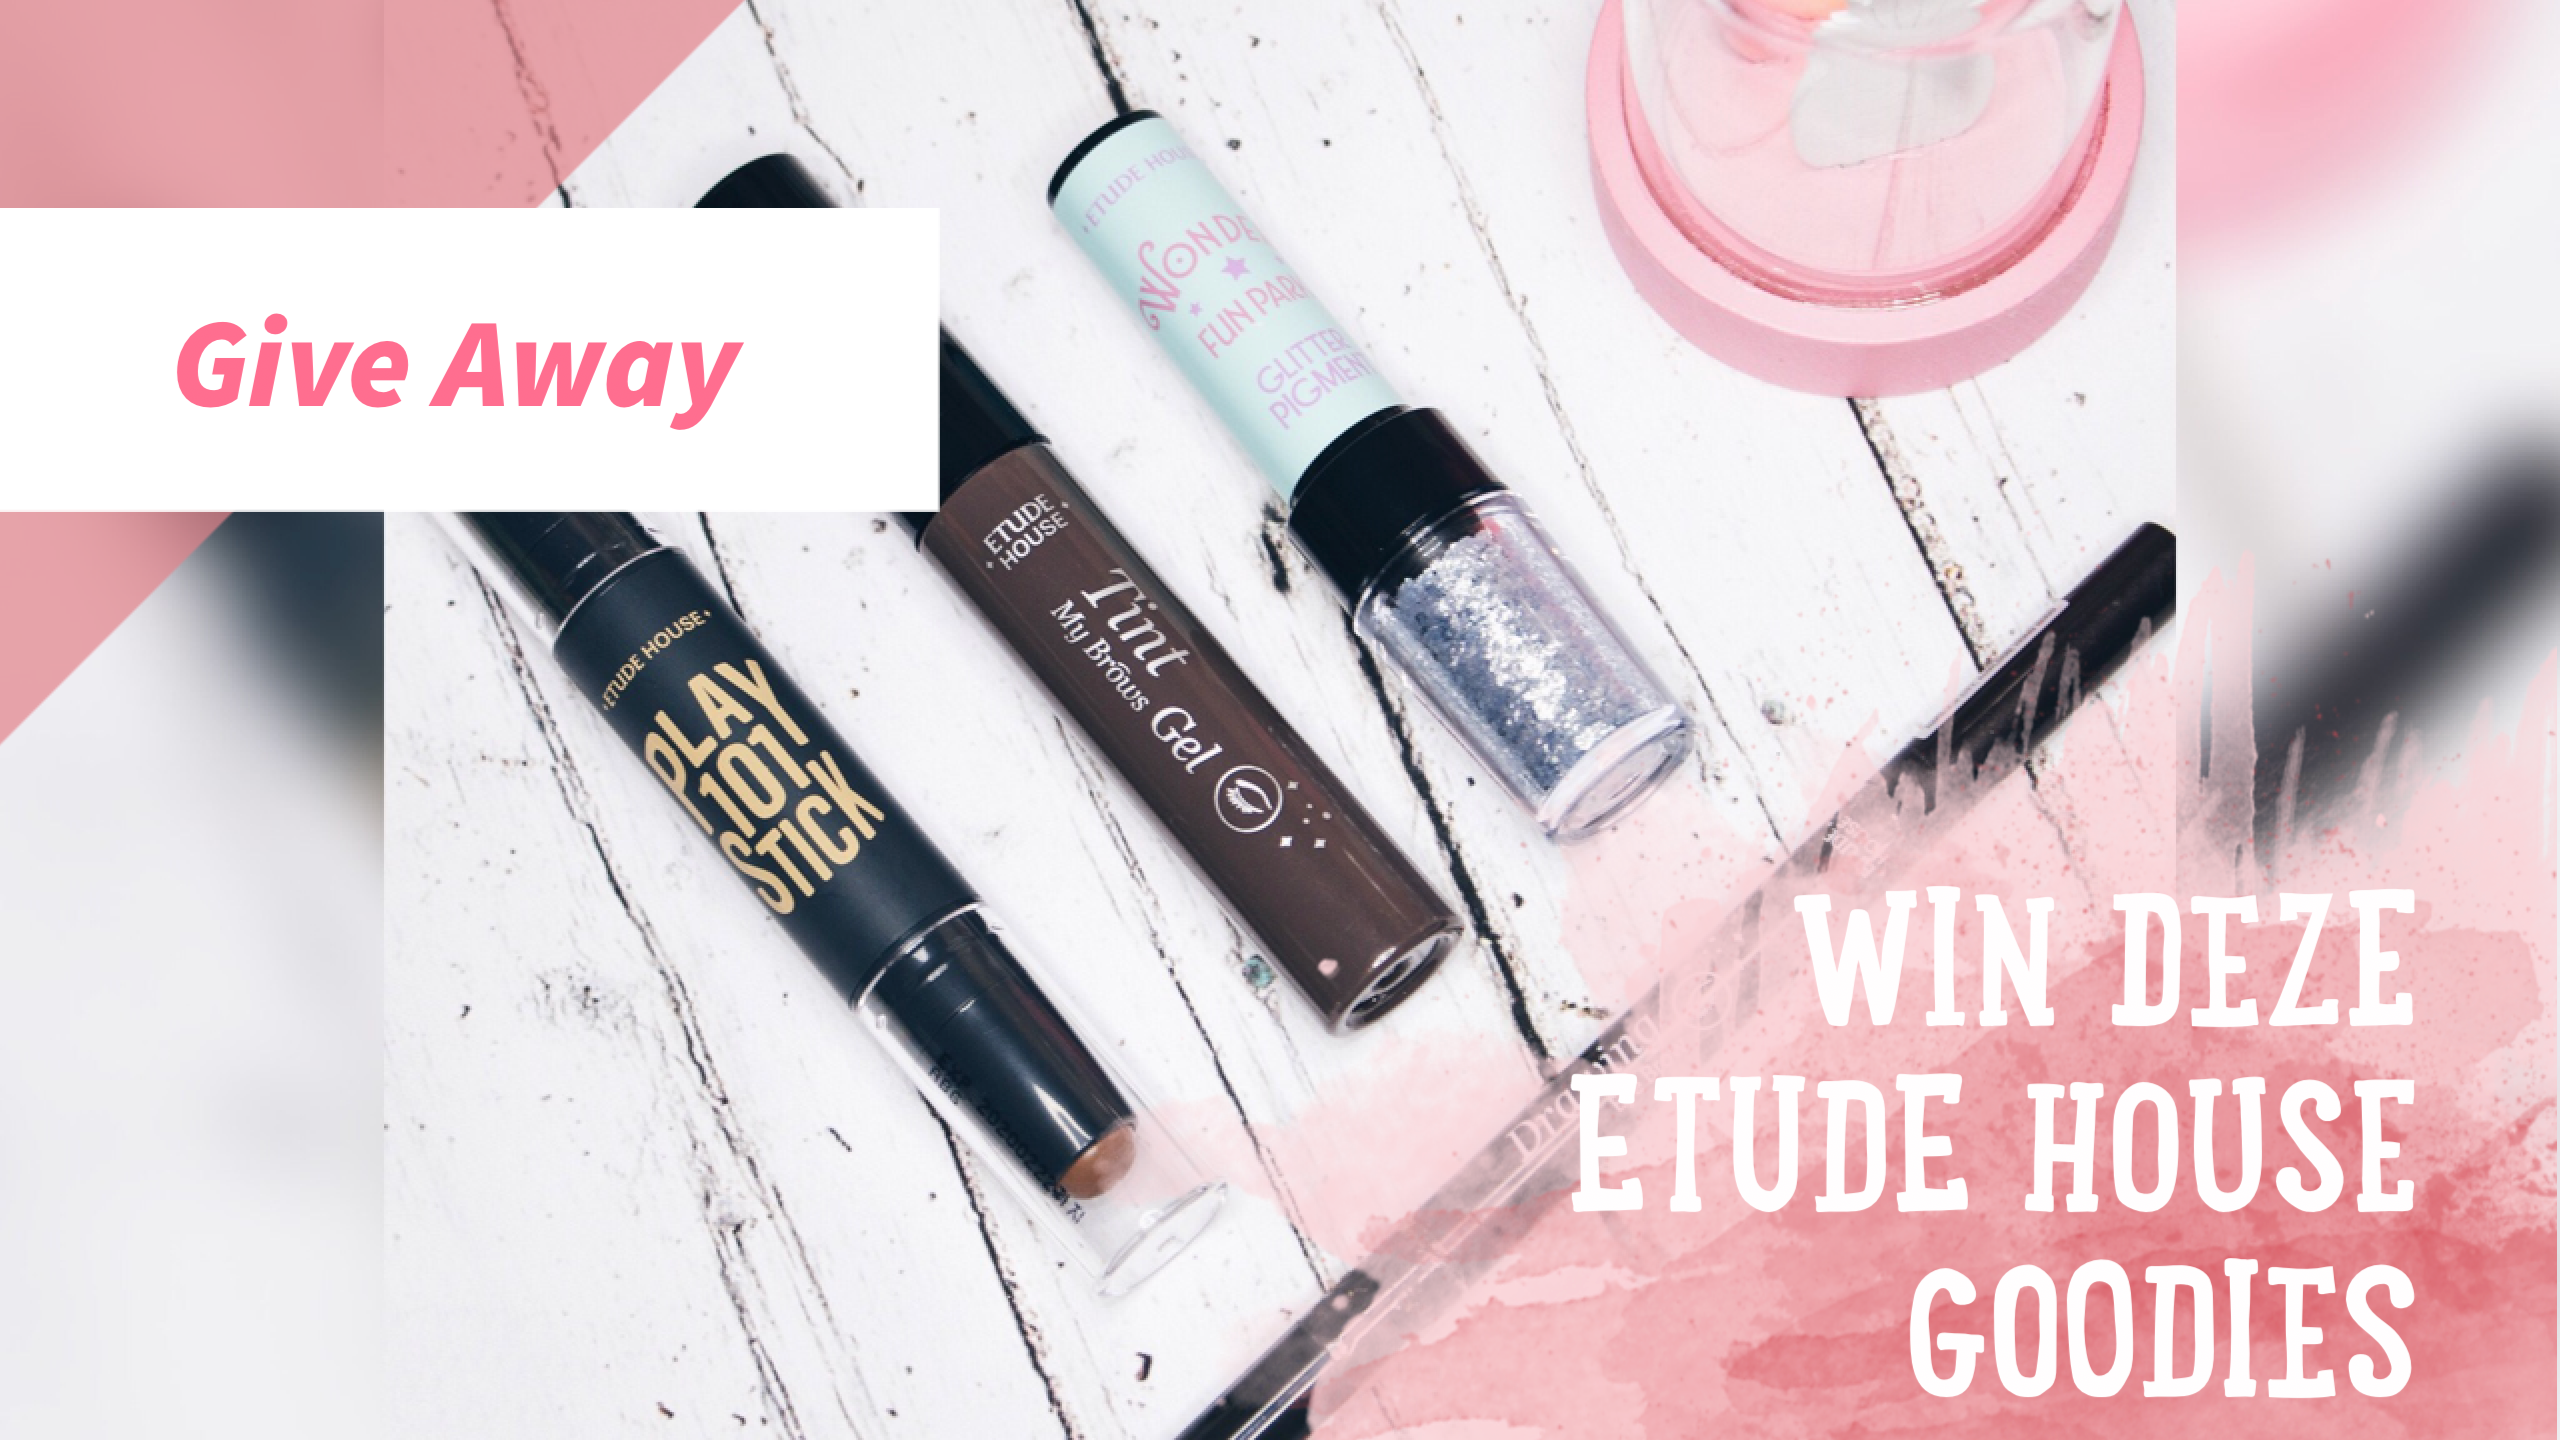 REVIEW ETUDE HOUSE MAKE-UP